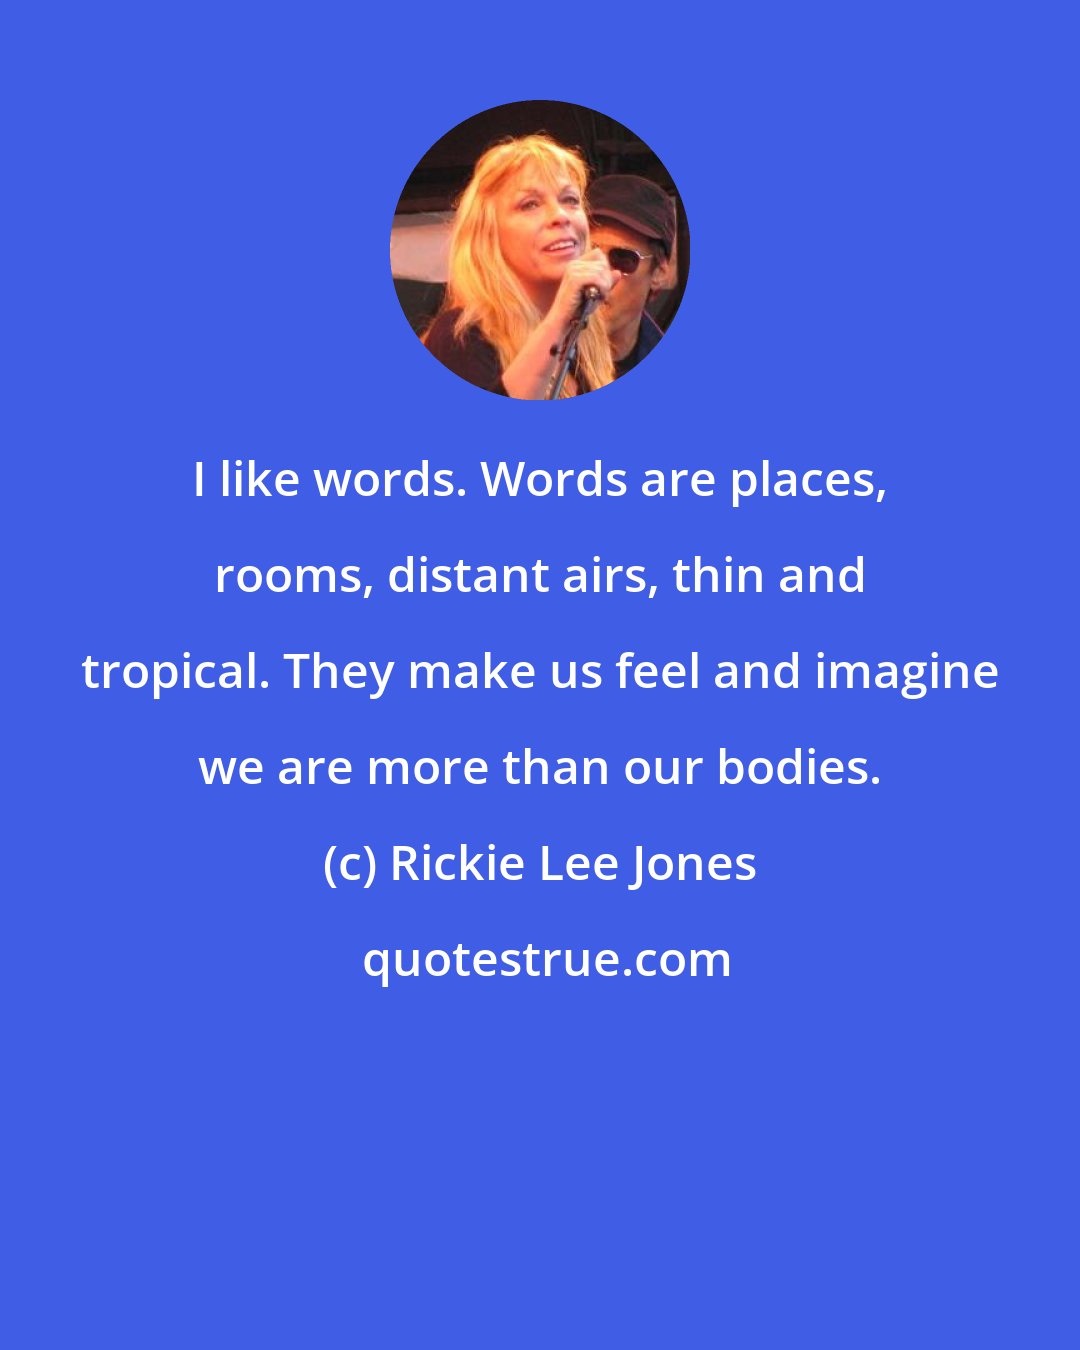 Rickie Lee Jones: I like words. Words are places, rooms, distant airs, thin and tropical. They make us feel and imagine we are more than our bodies.